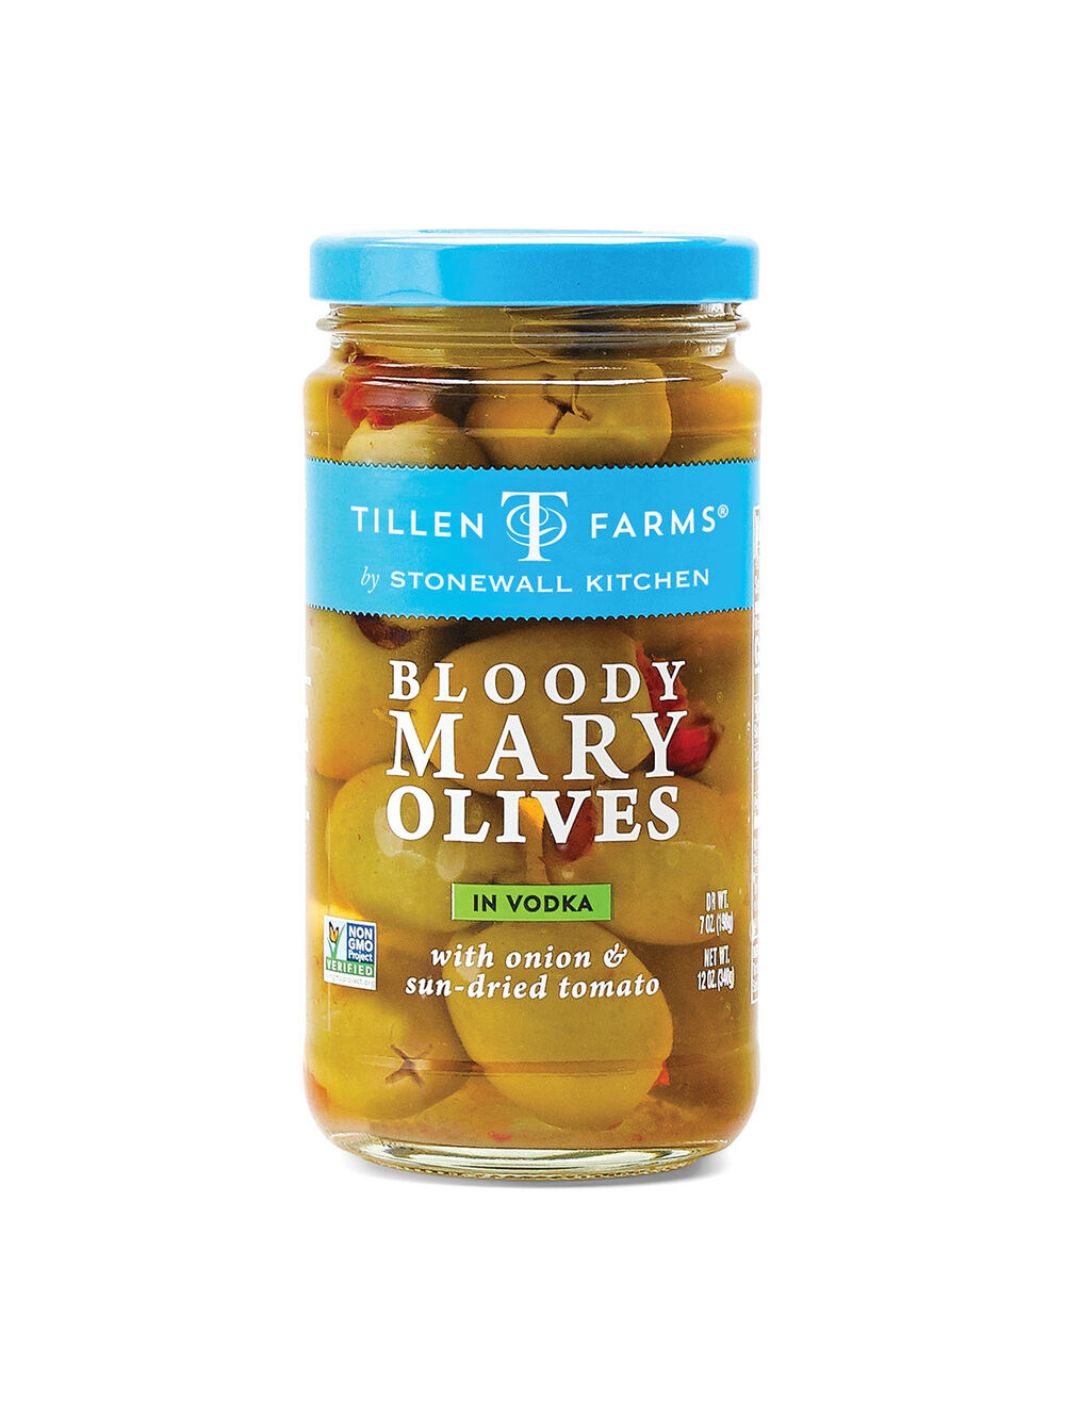 Bloody Mary Olives 12 oz.